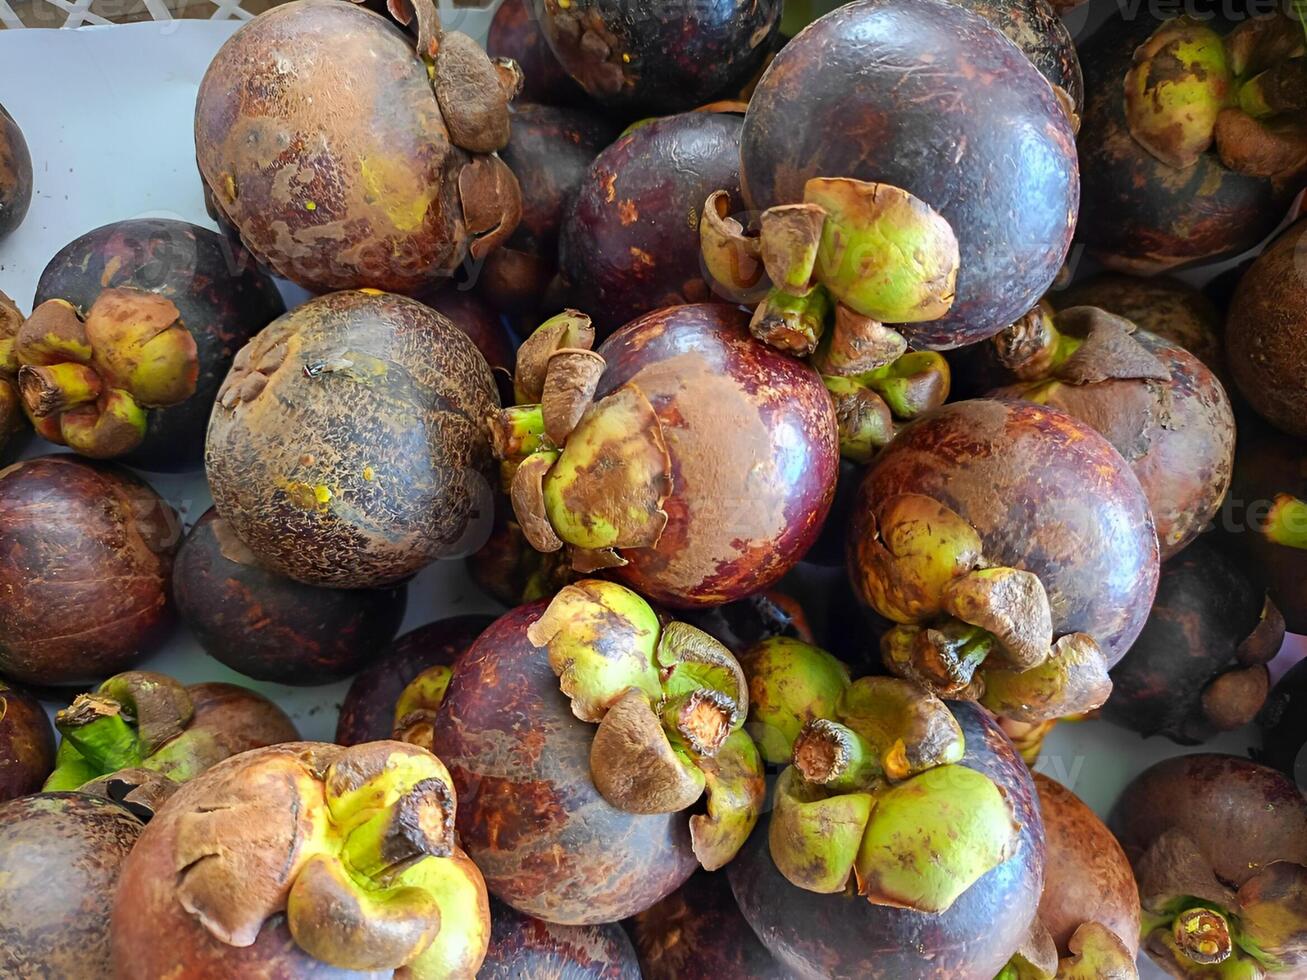 Fresh mangosteen fruit with dark purple skin and natural tropical delicacy. suitable for health, culinary content, or as an article on the benefits of mangosteen fruit. photo